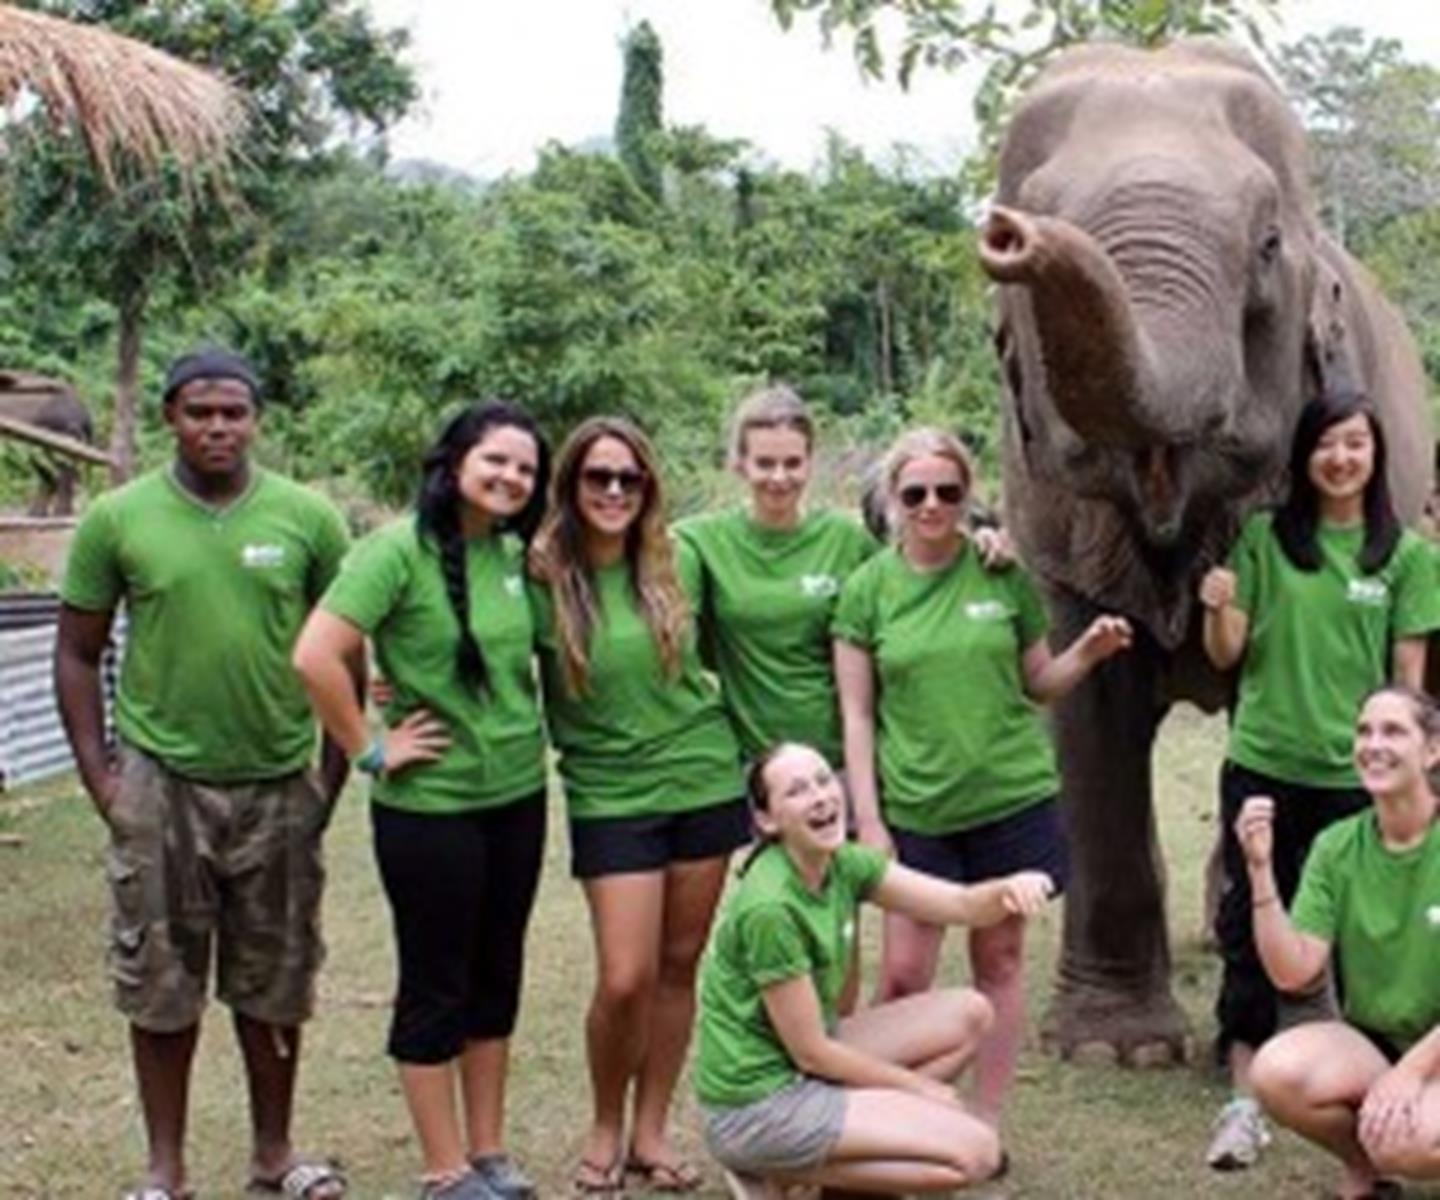 In Thailand, International Student Volunteers (ISV) supports a sanctuary for elephants that have been rescued from the tourism and logging industries.